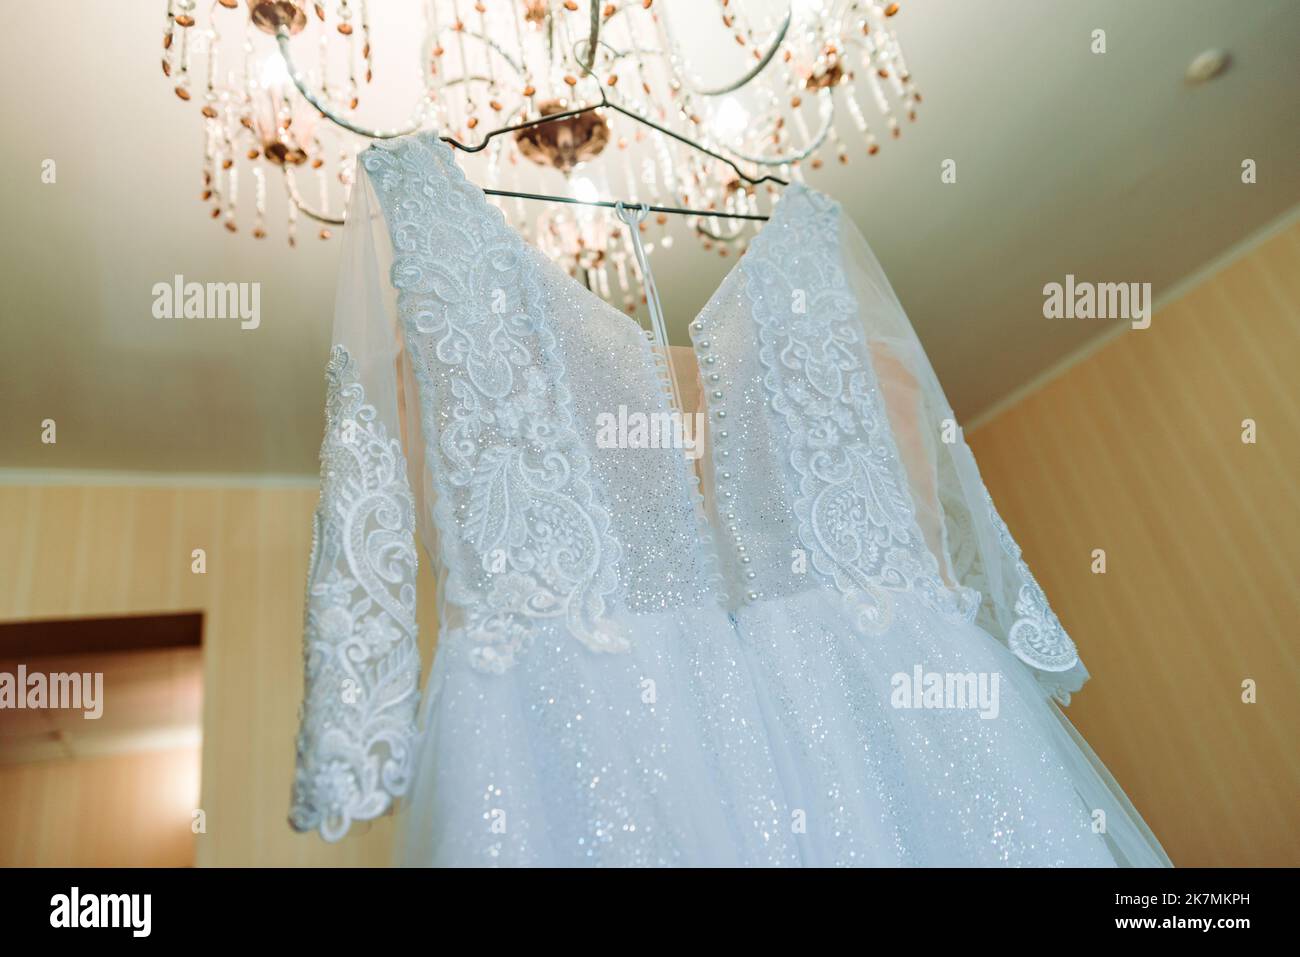 The perfect wedding dress with a full skirt on a hanger in the room of the bride with blue curtains Stock Photo